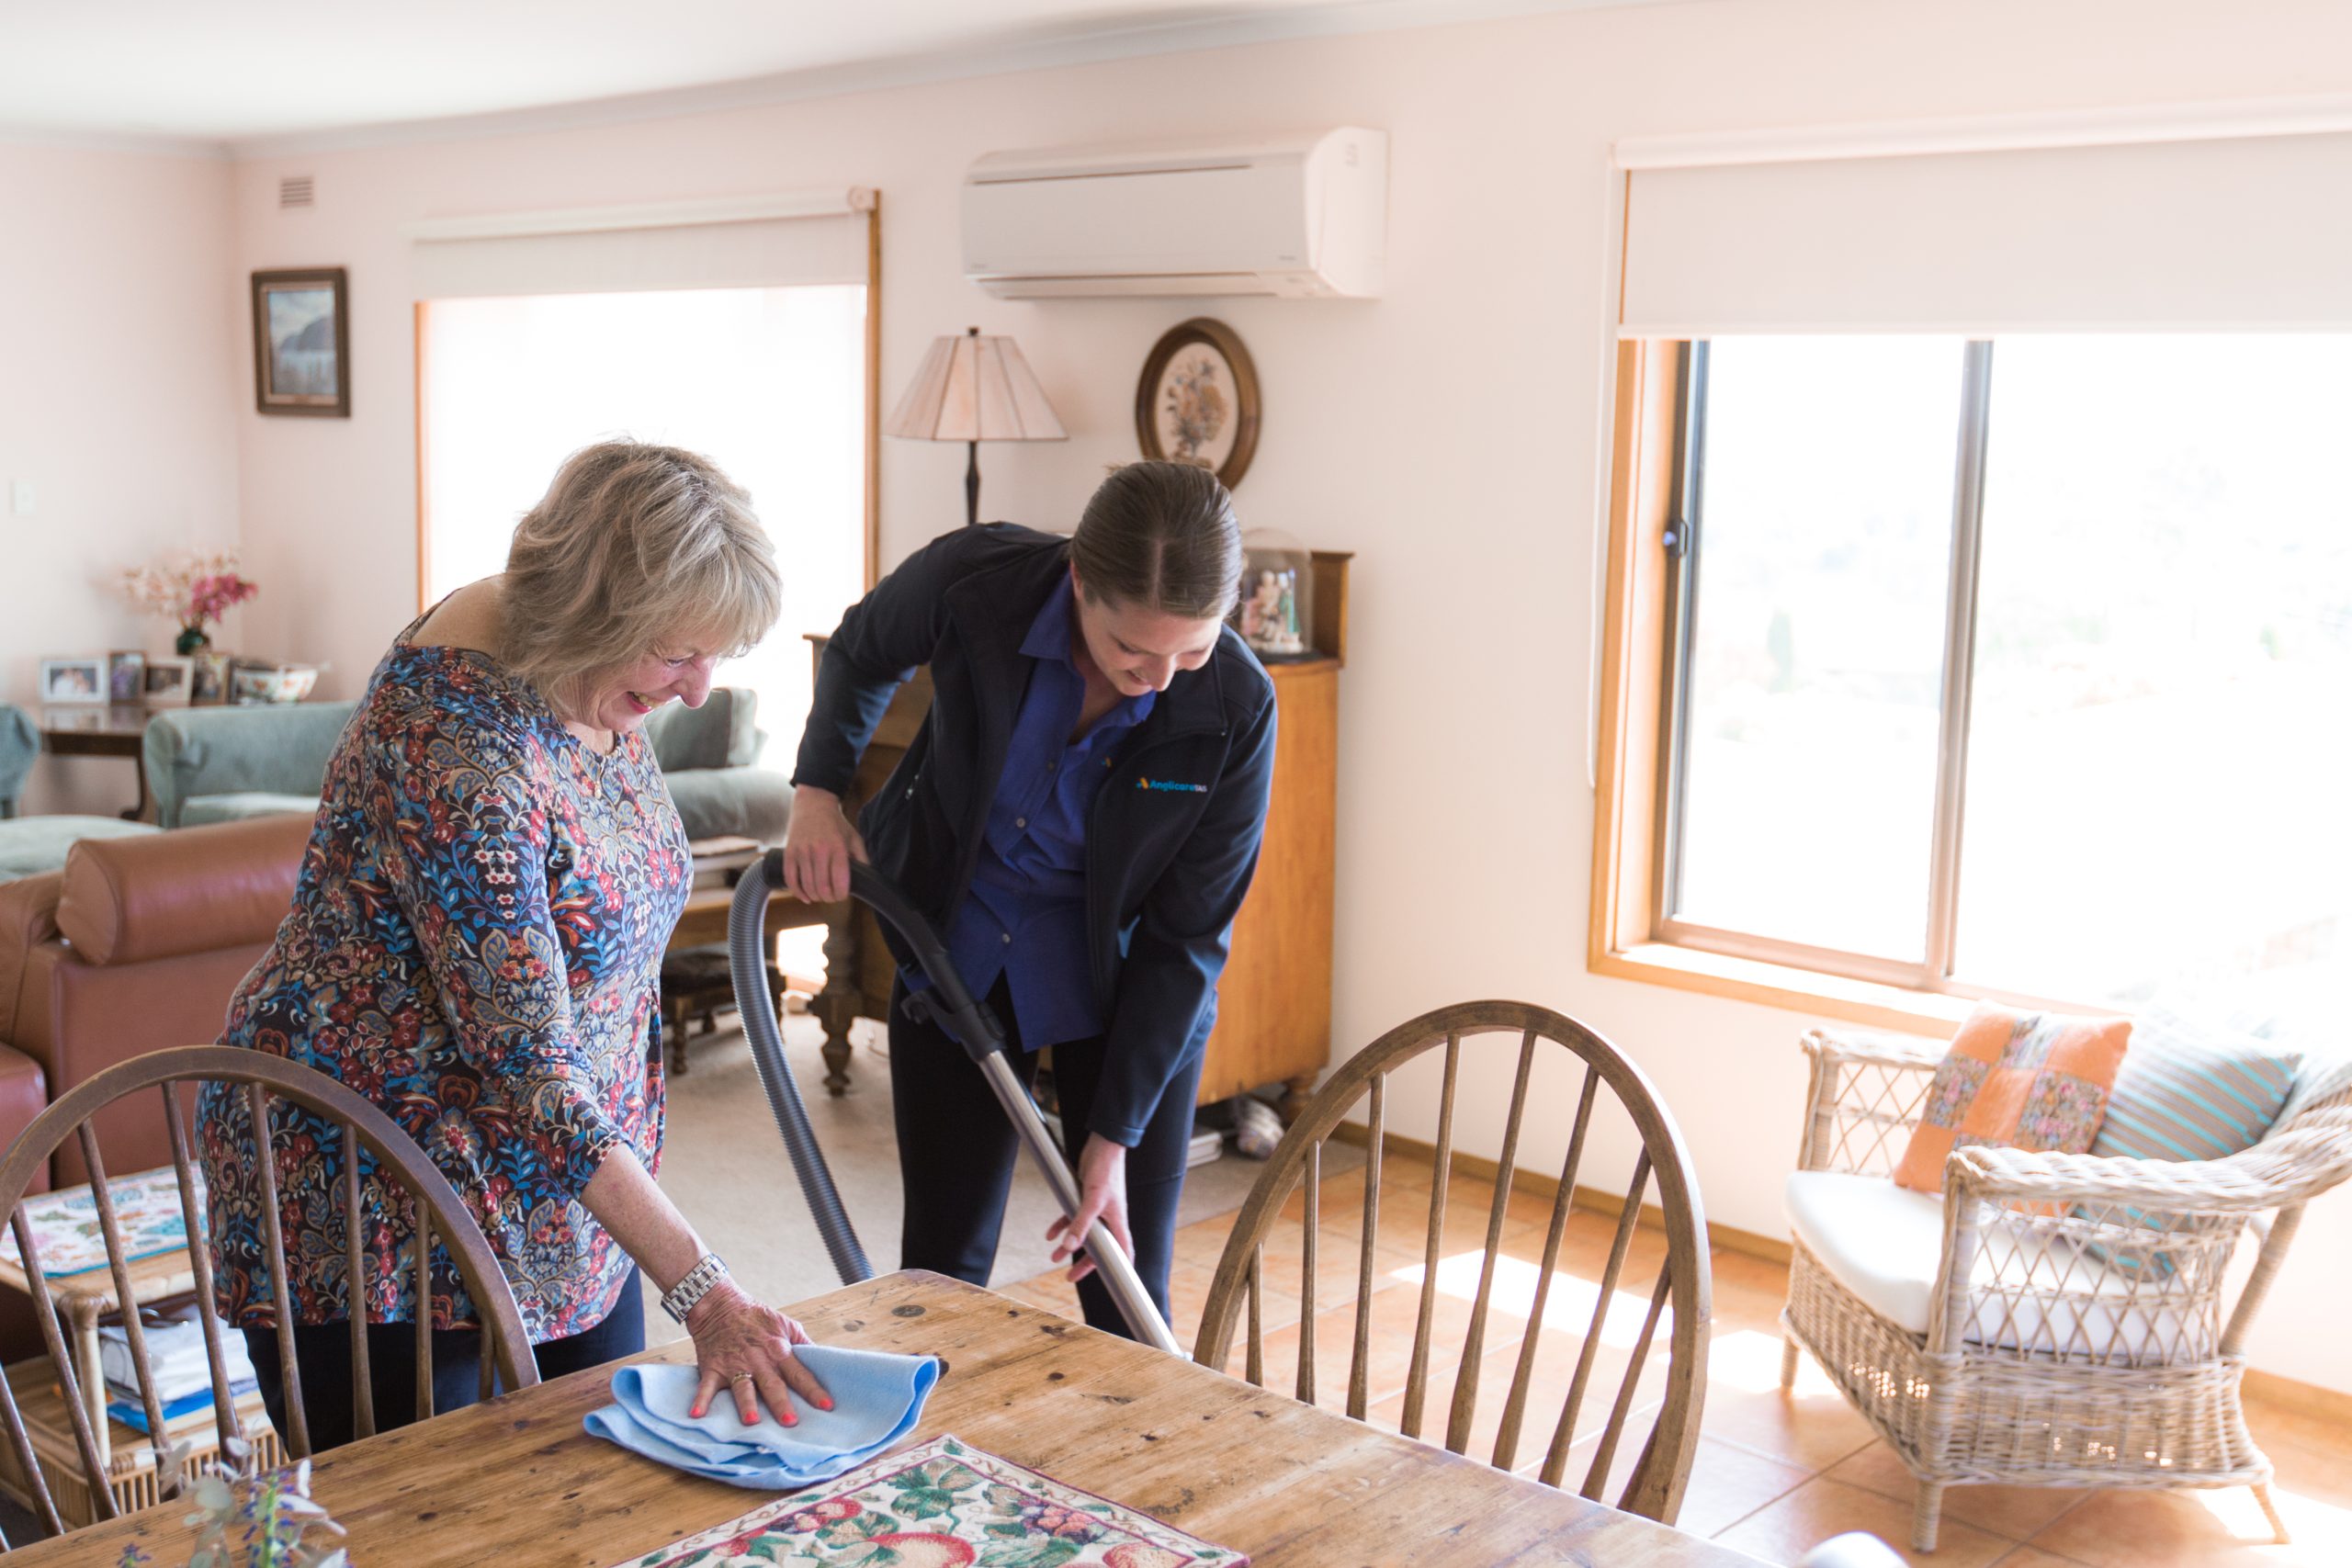 Two ladies doing housework together in a house. One is cleaning the tabletop and the other is vacumning. The person vacuuming is wearing an Anglicare Tasmania Home Care Support Worker uniform.